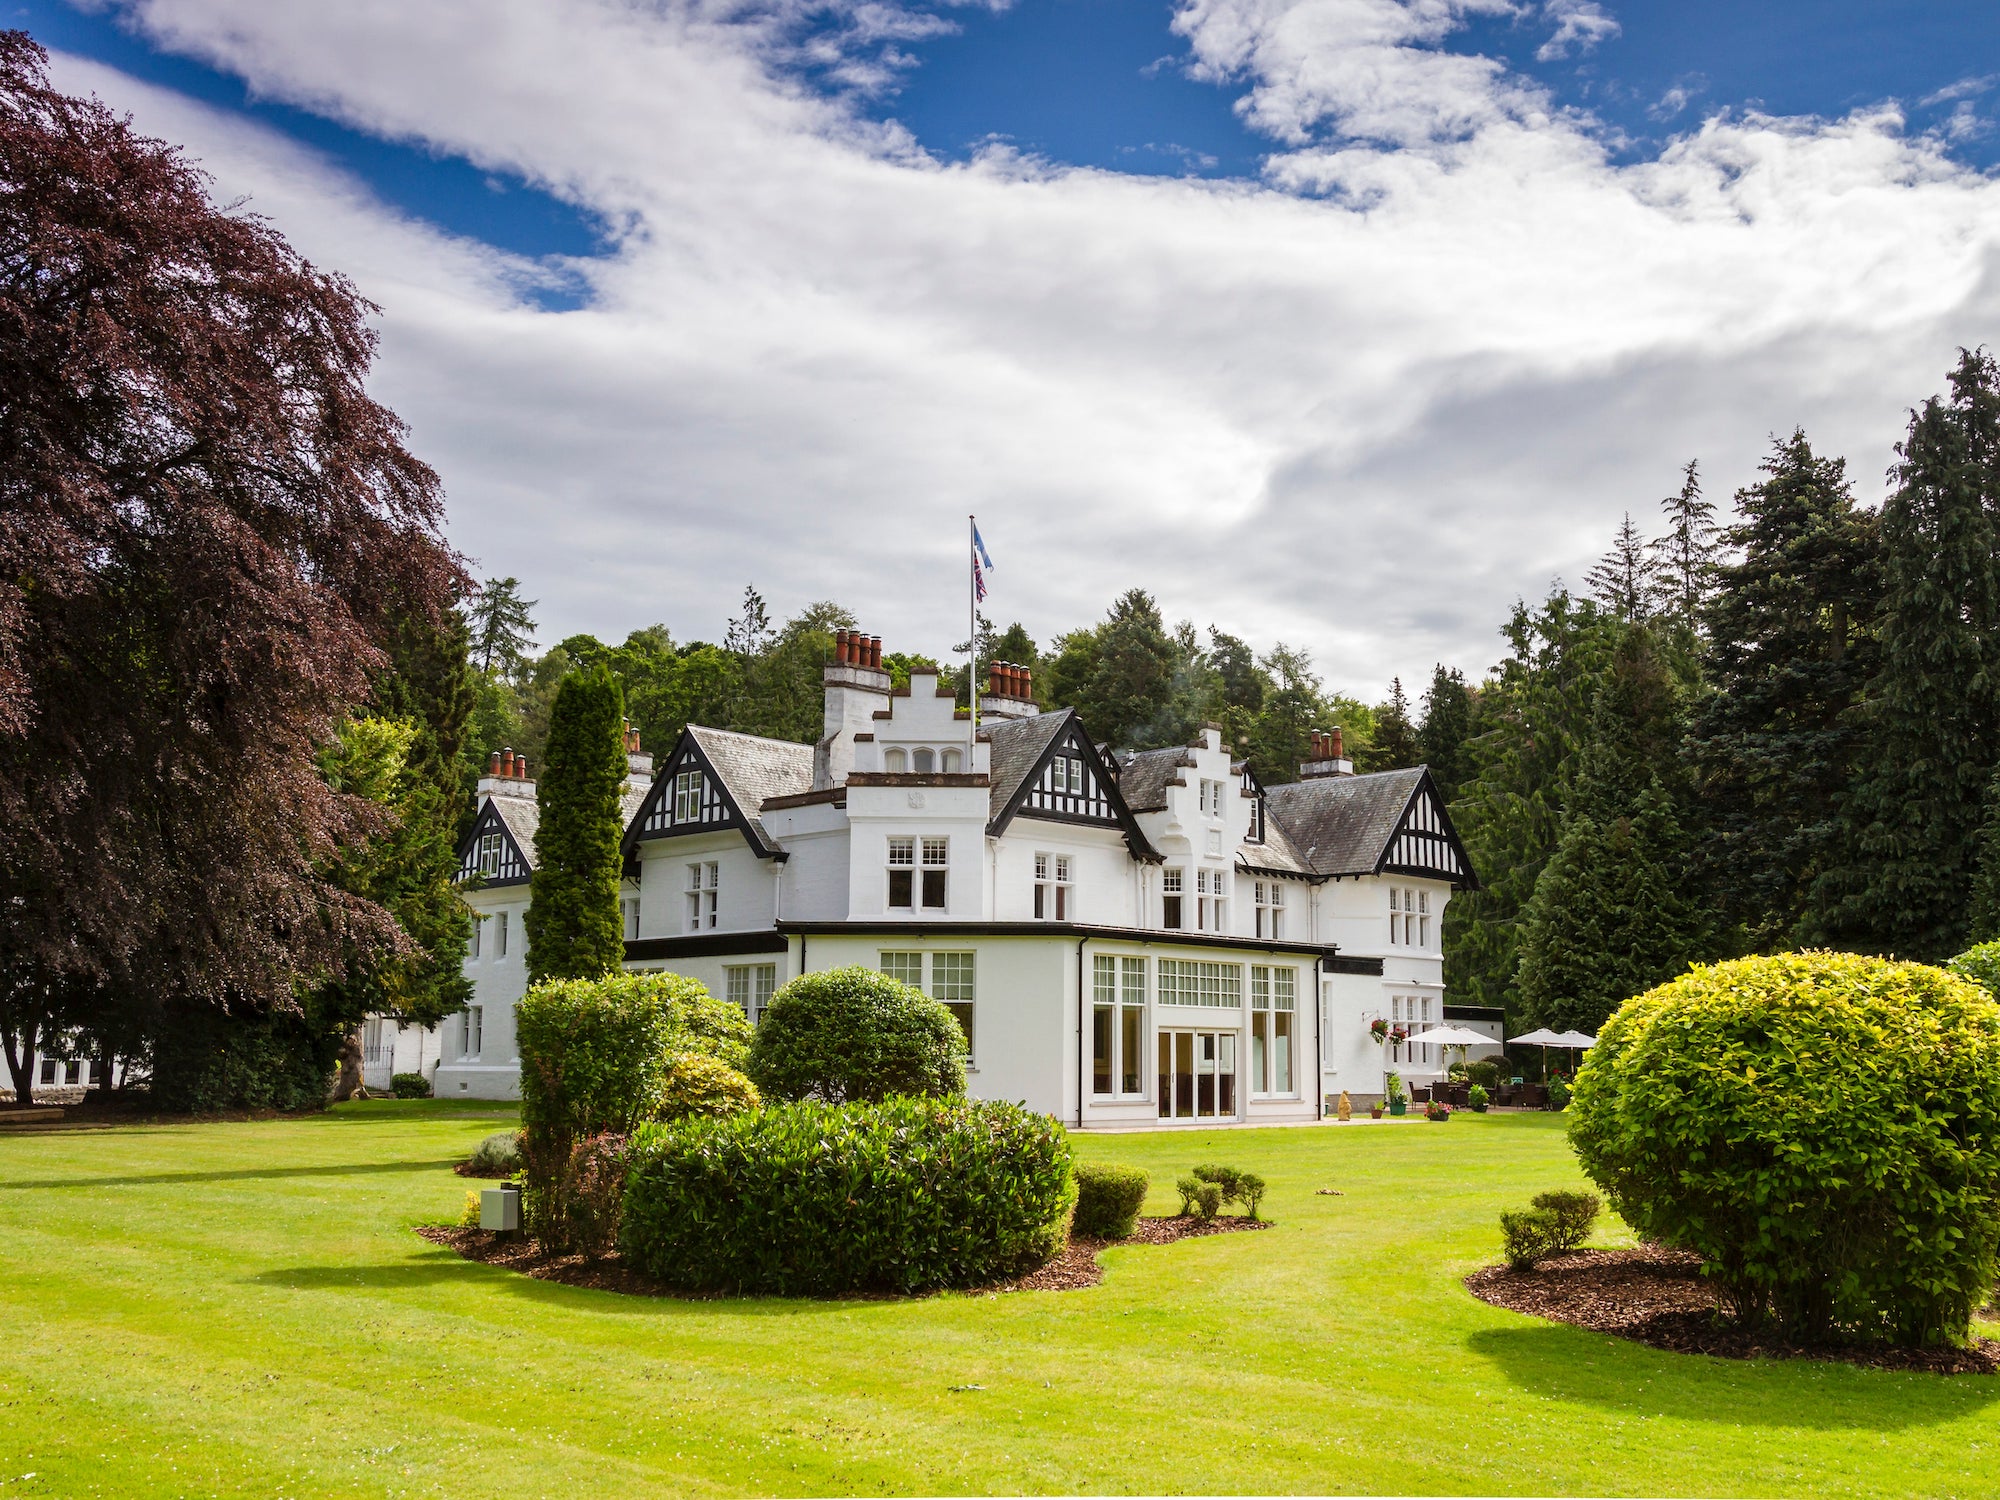 Apex Hotels diversifies portfolio with acquisition of Pitlochry's Pine Trees Hotel